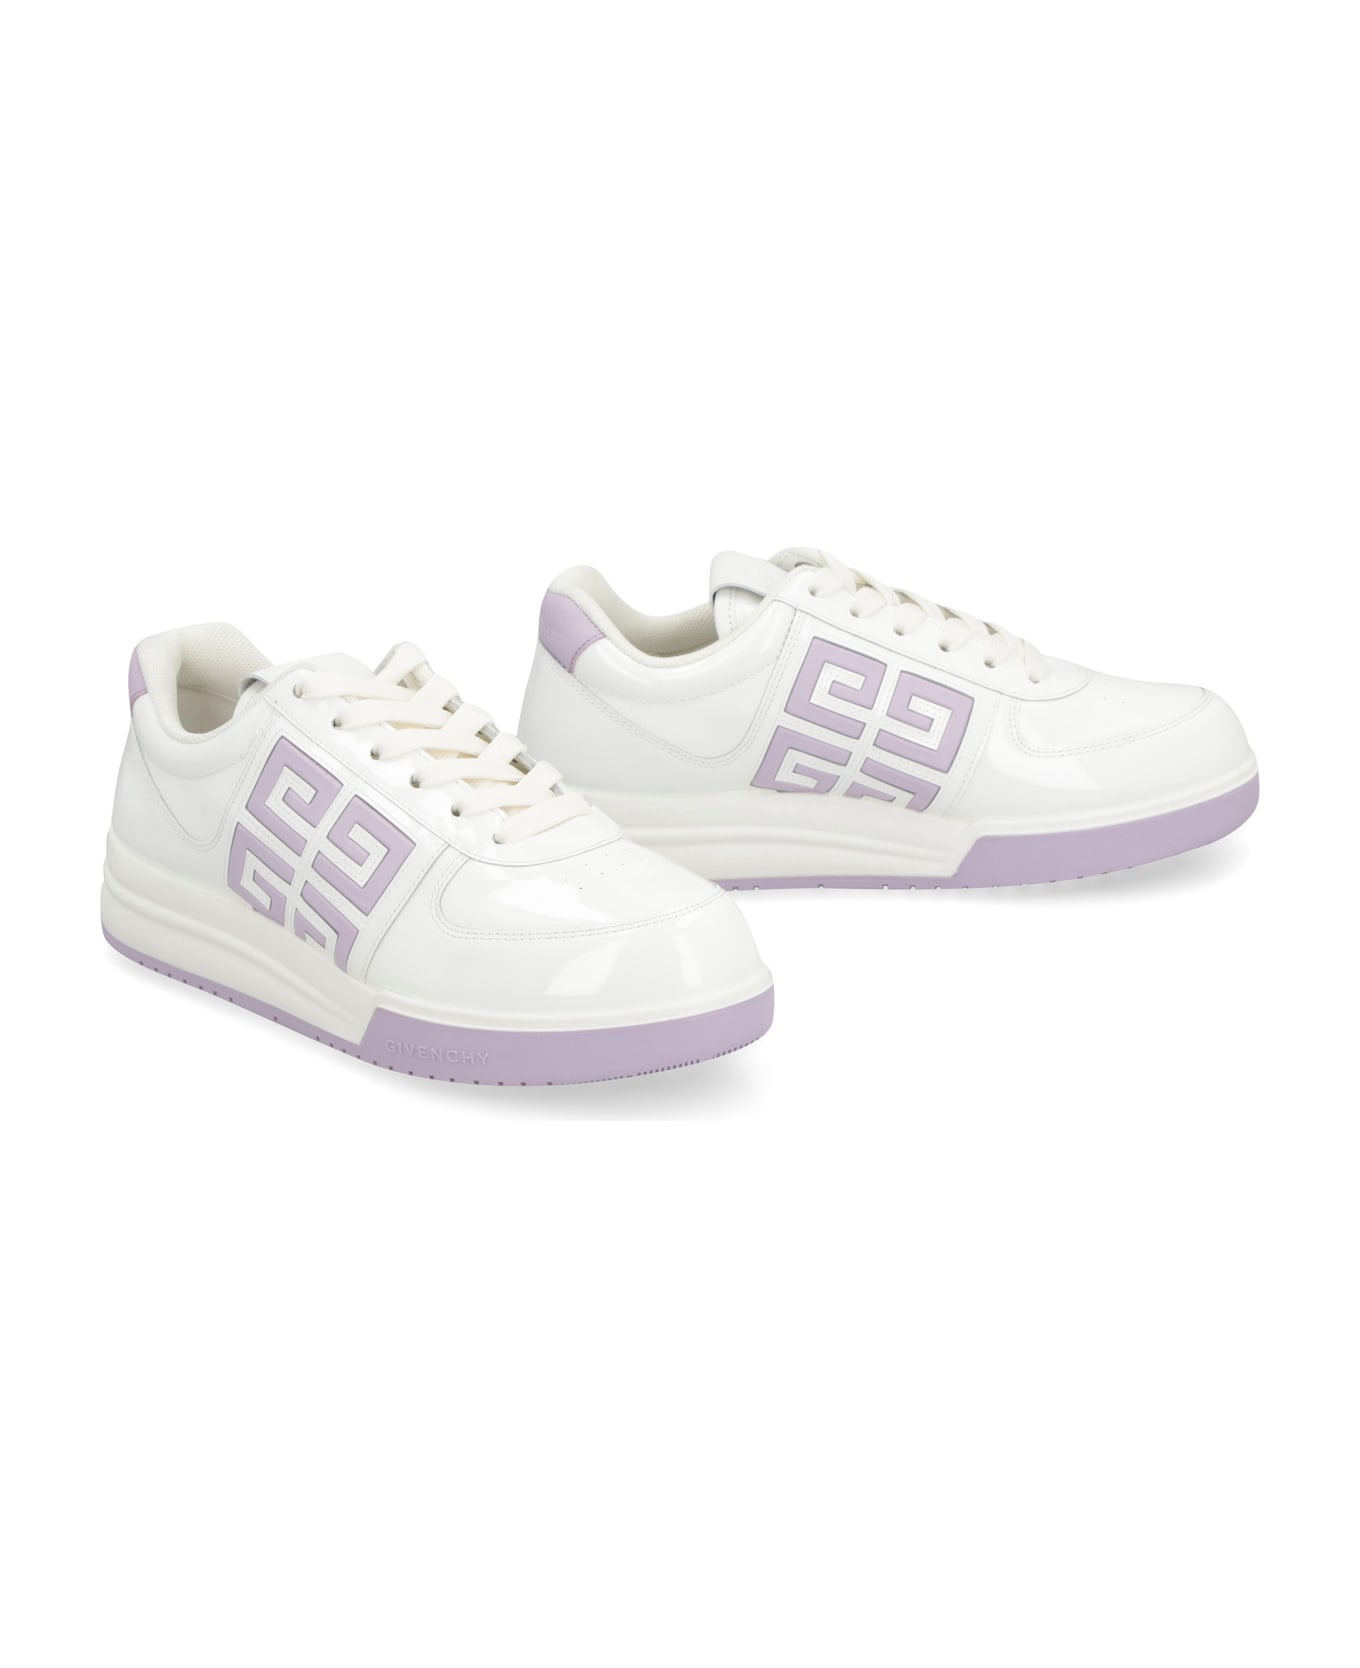 Givenchy G4 Leather Sneakers - White スニーカー